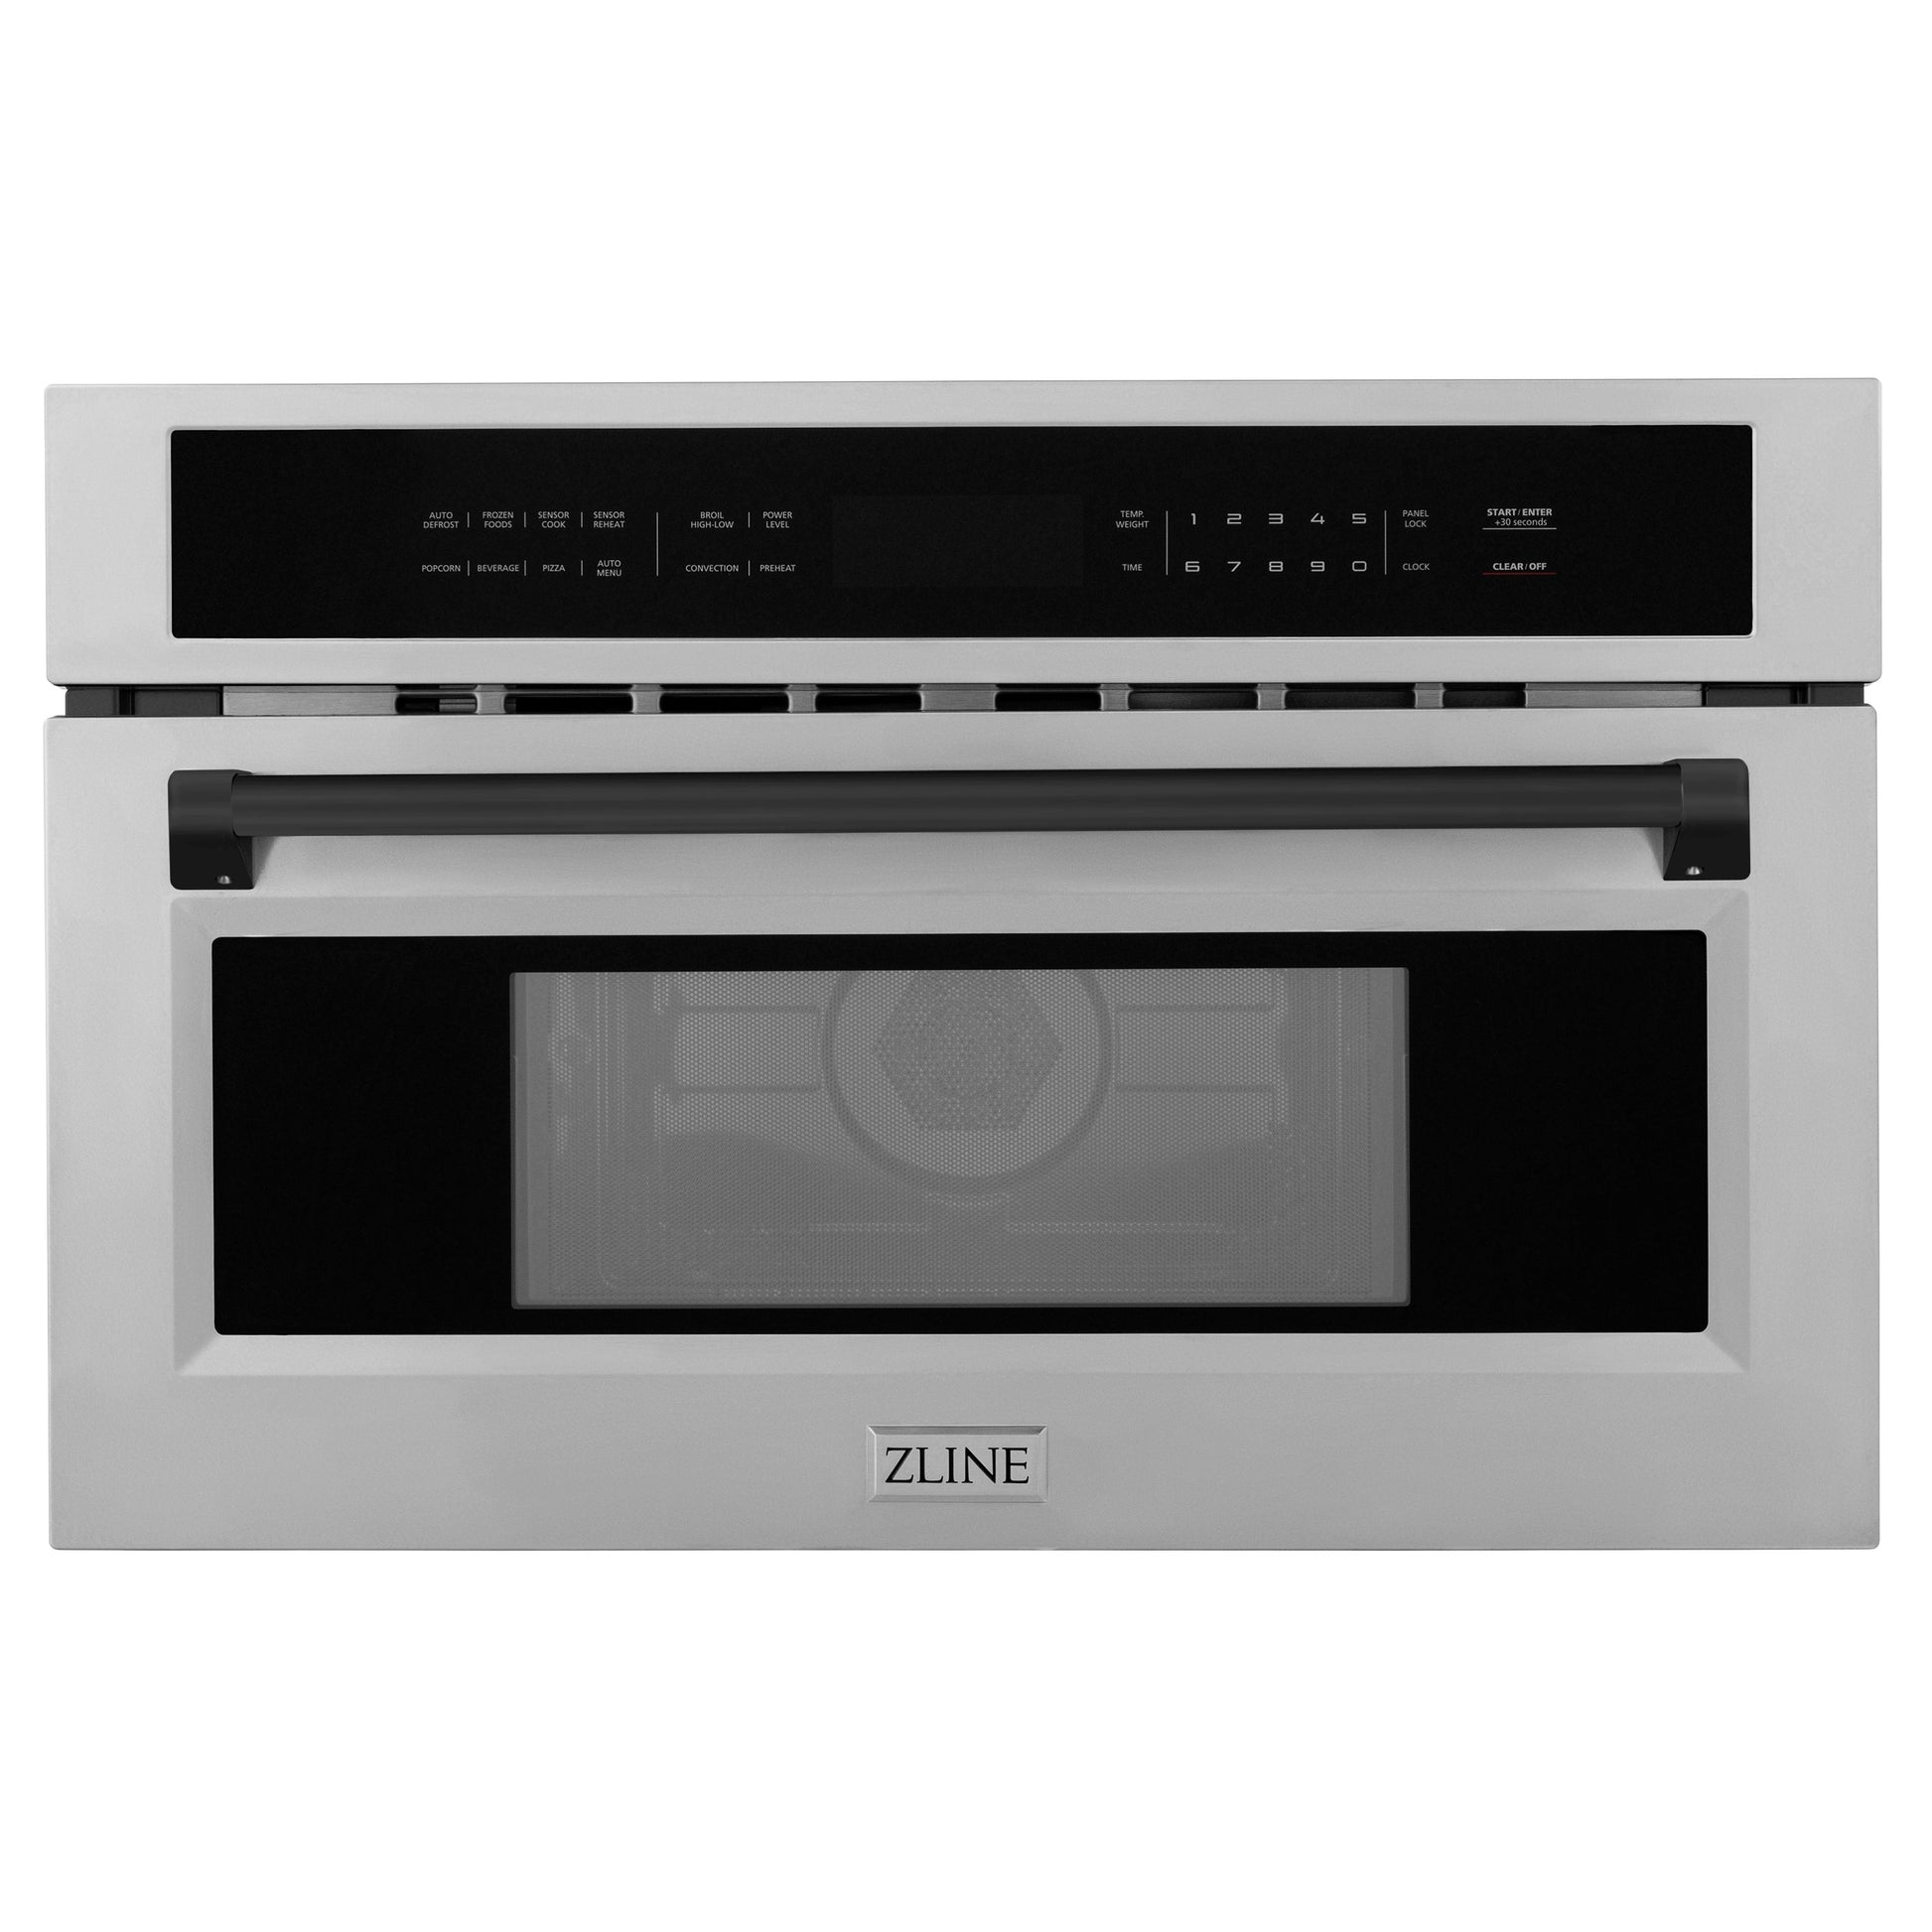 ZLINE Autograph Edition 30" Built-in Convection Microwave Oven - DuraSnow Stainless Steel with Accents